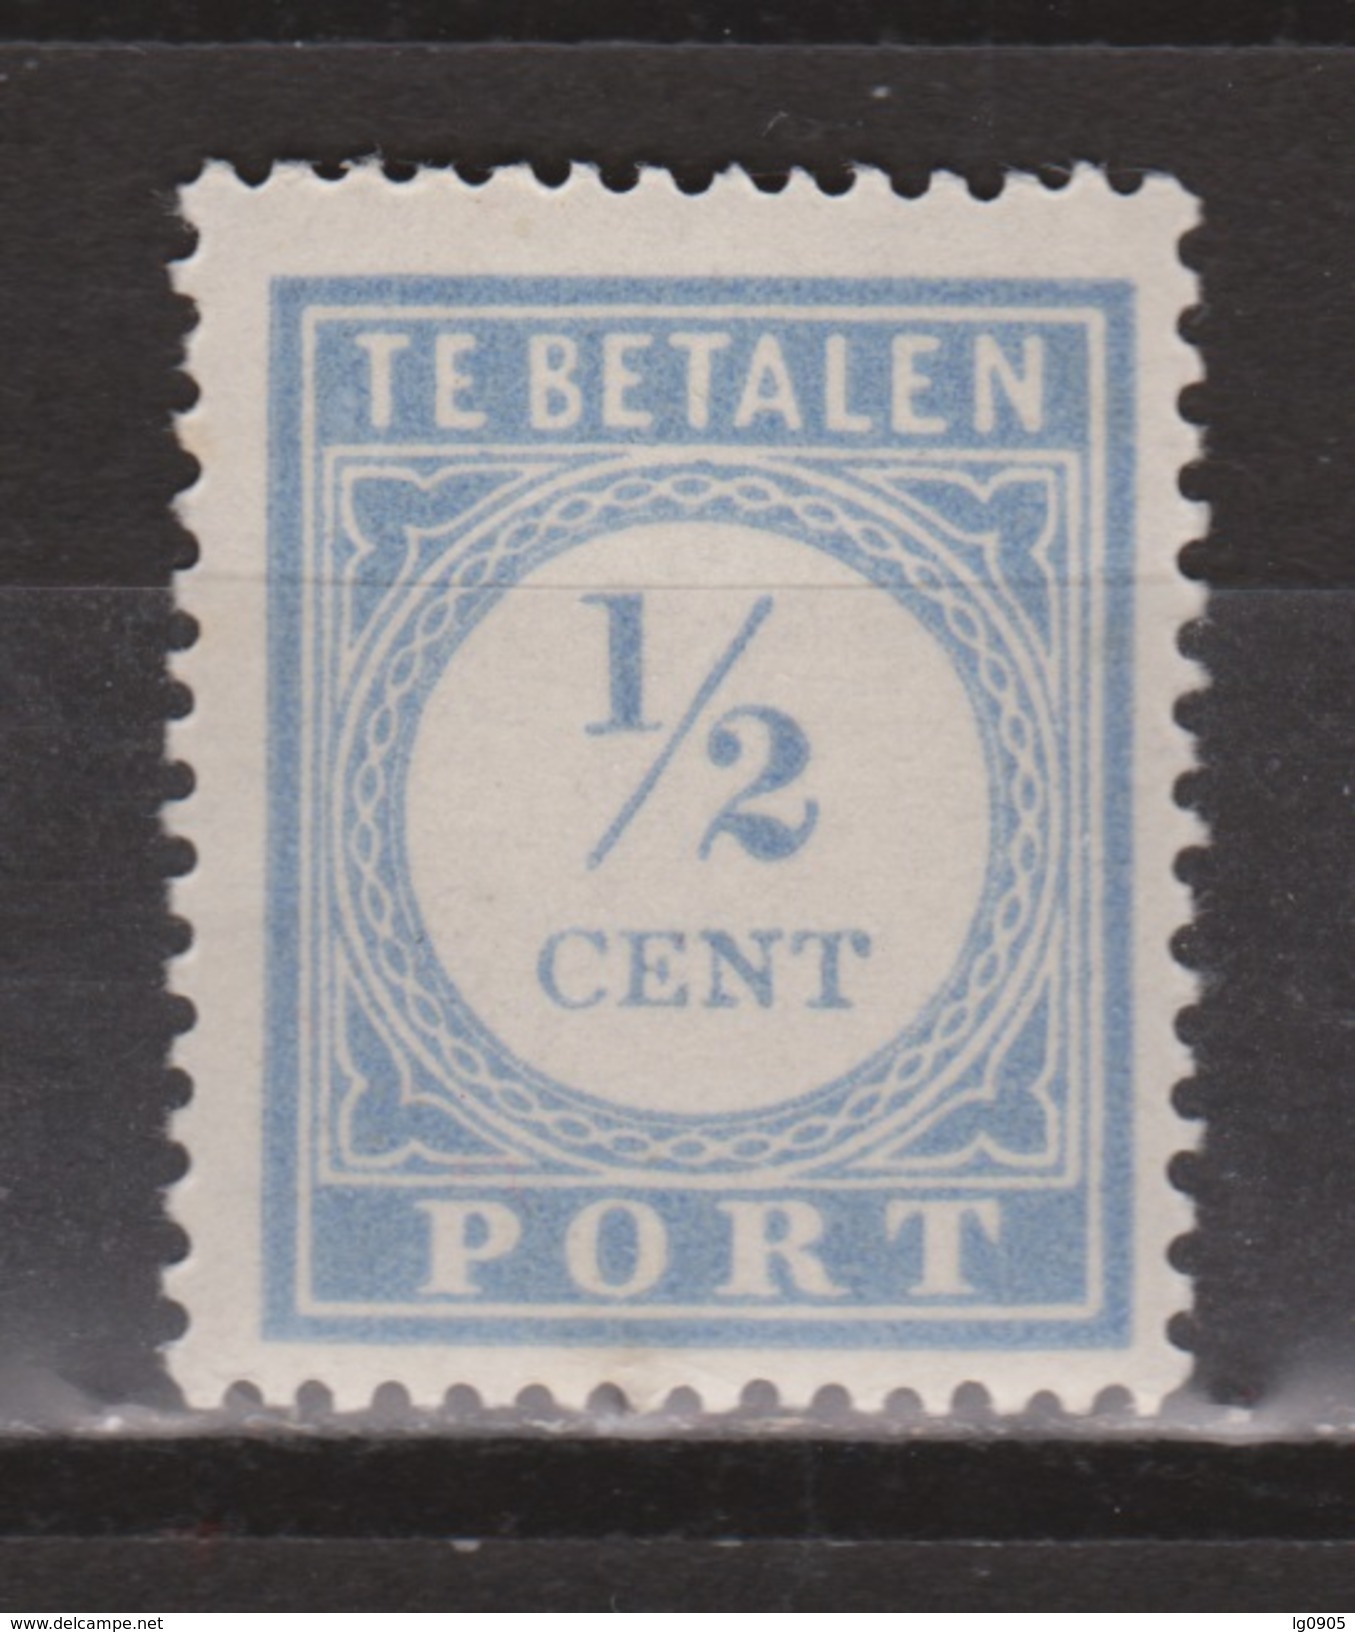 NVPH Nederland Netherlands Pays Bas Holanda 44 MLH ; Port Timbre-taxe Postmarke Sellos De Correos NOW MANY DUE STAMPS - Impuestos